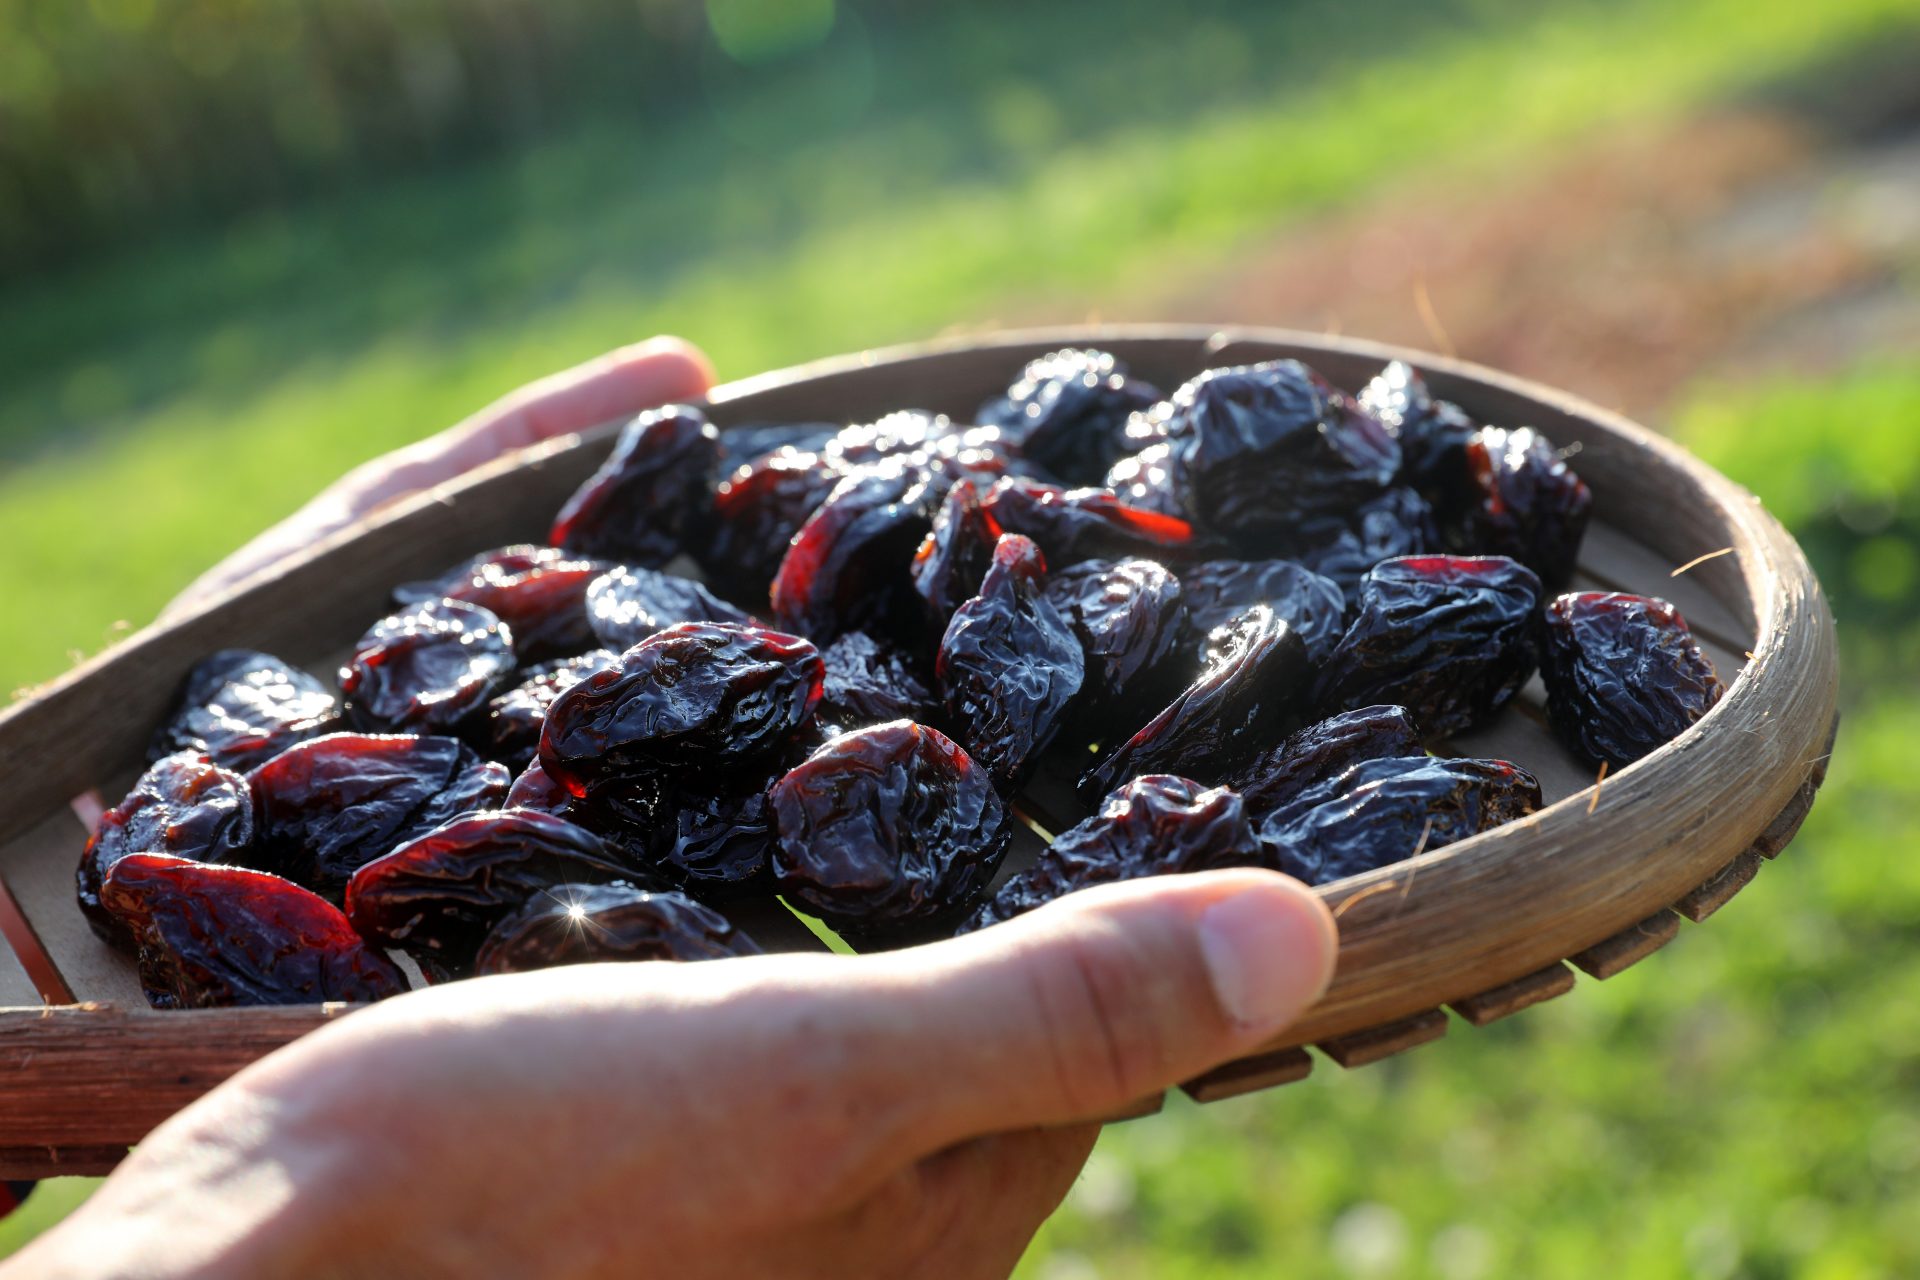 Let prunes be thy medicine: They're good for your bones